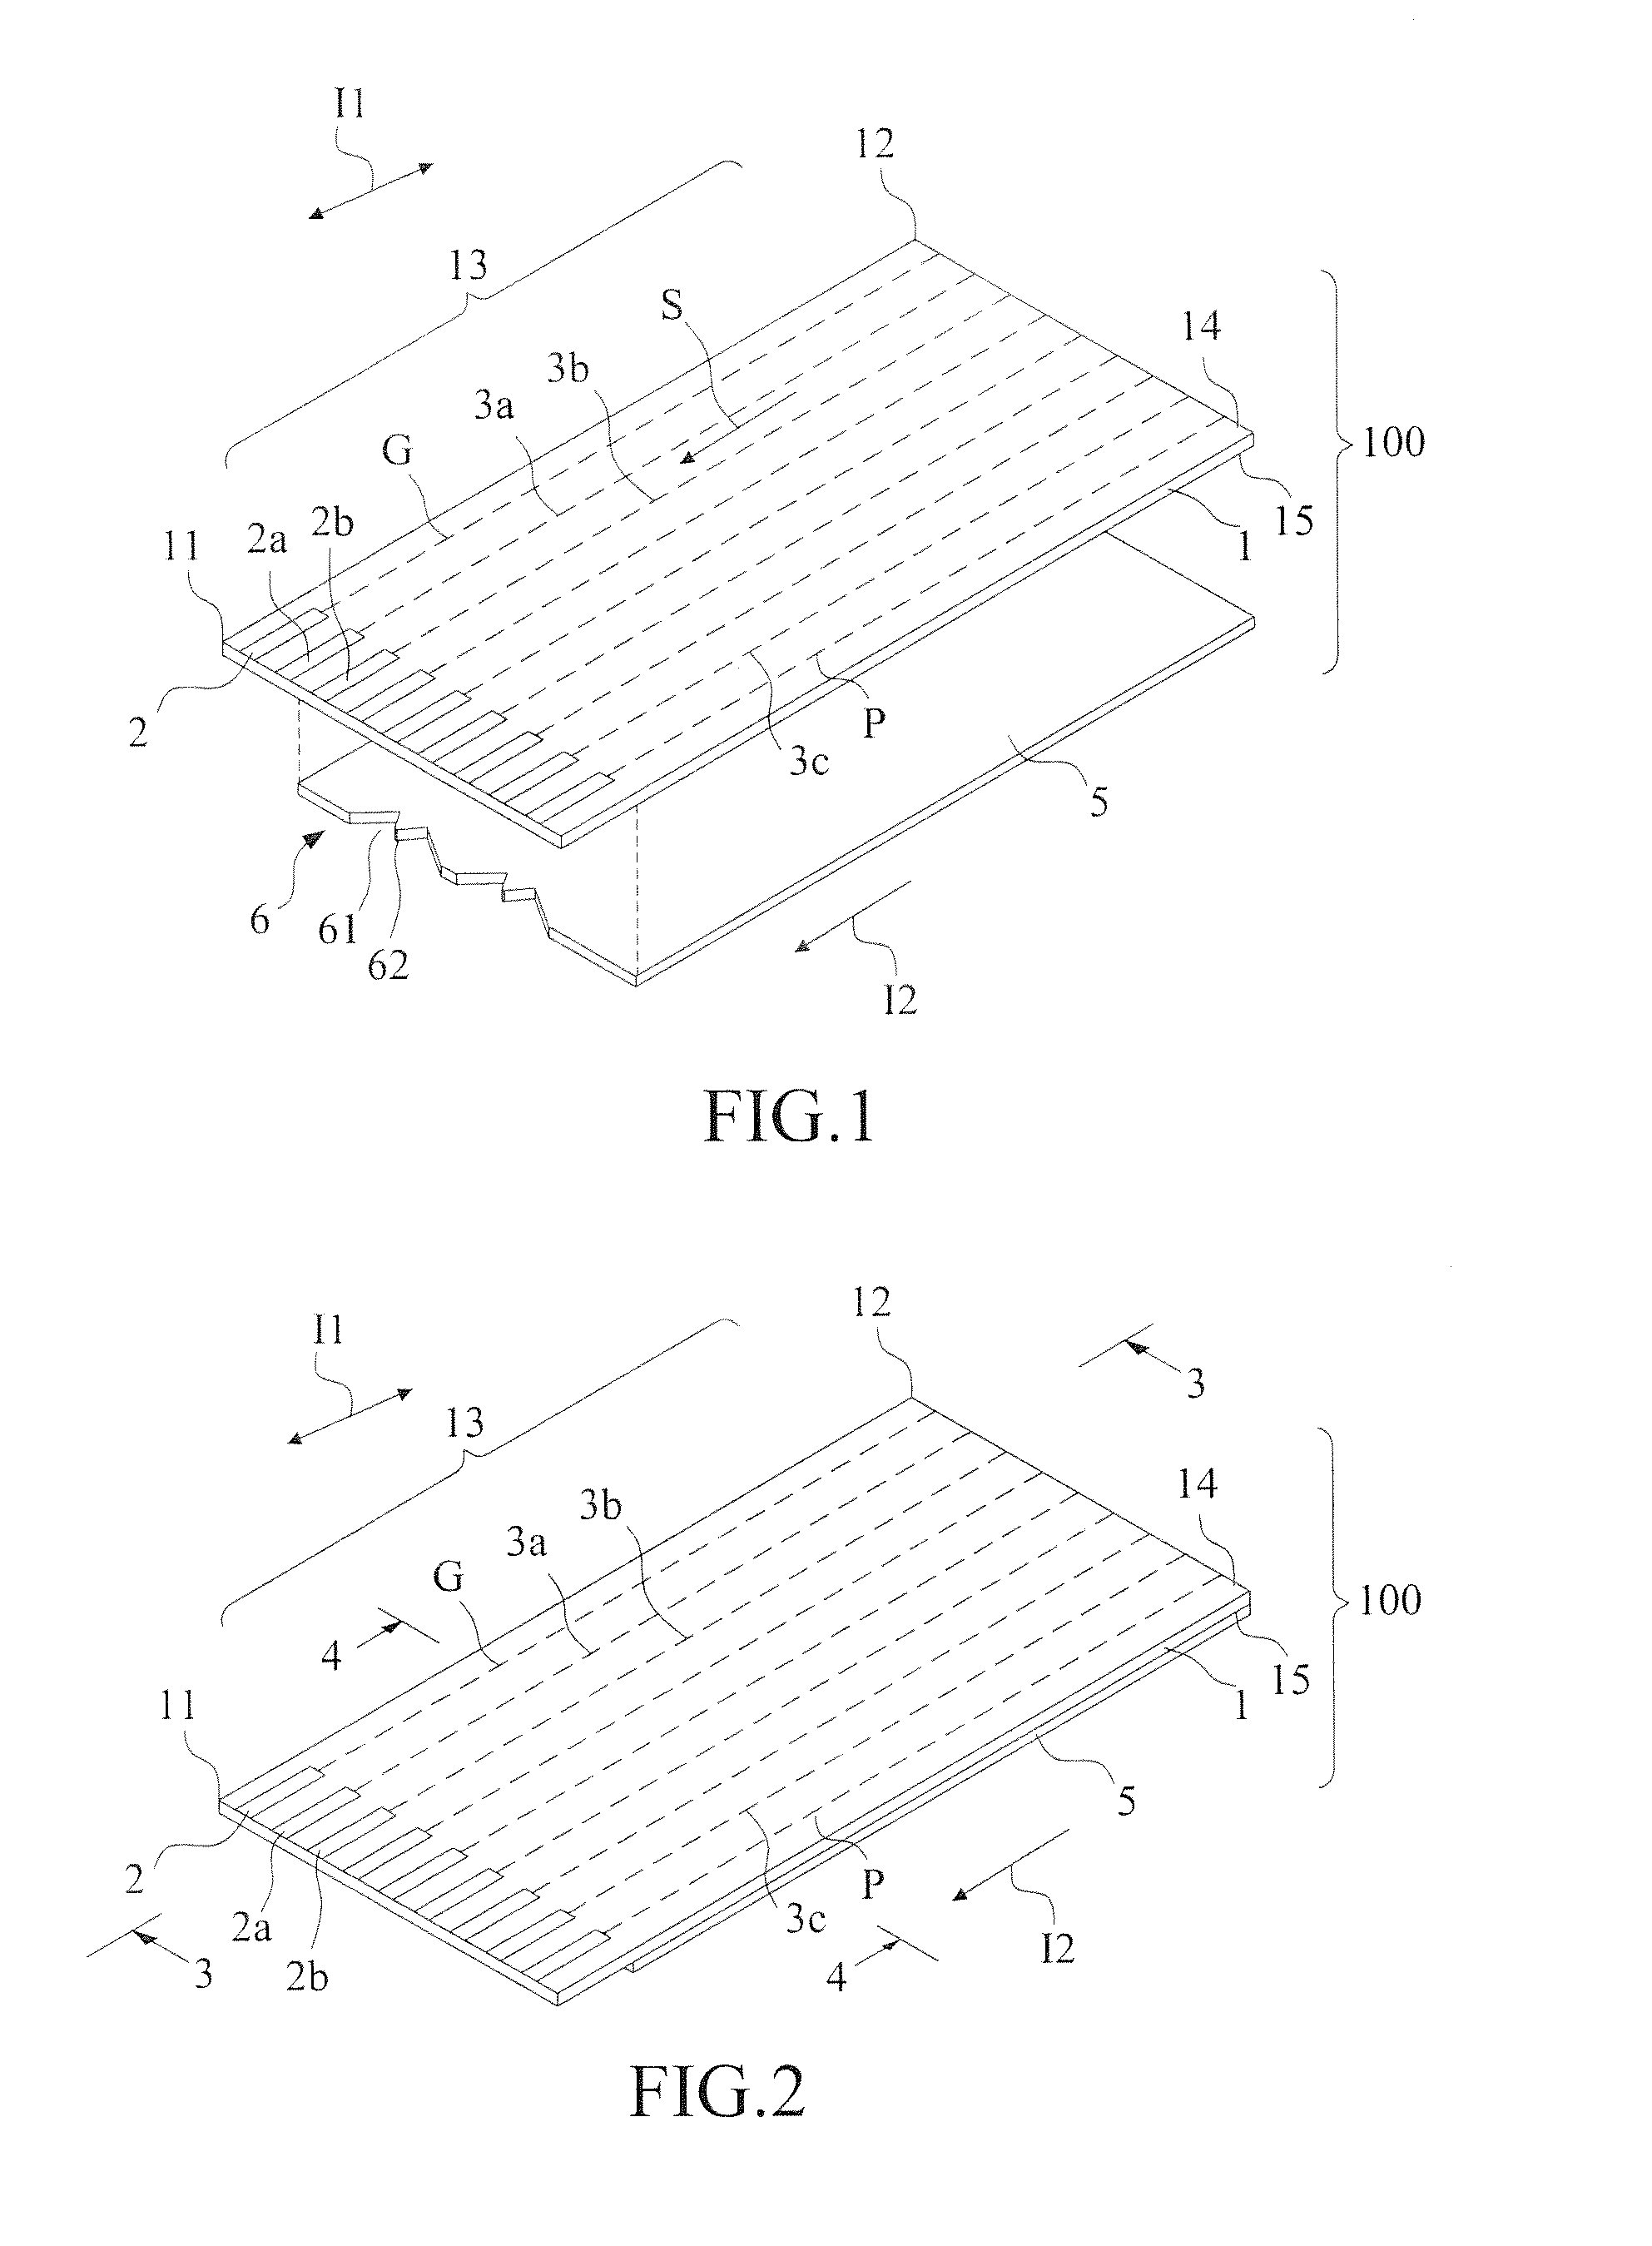 Attenuation reduction grounding pattern structure for connection pads of flexible circuit board